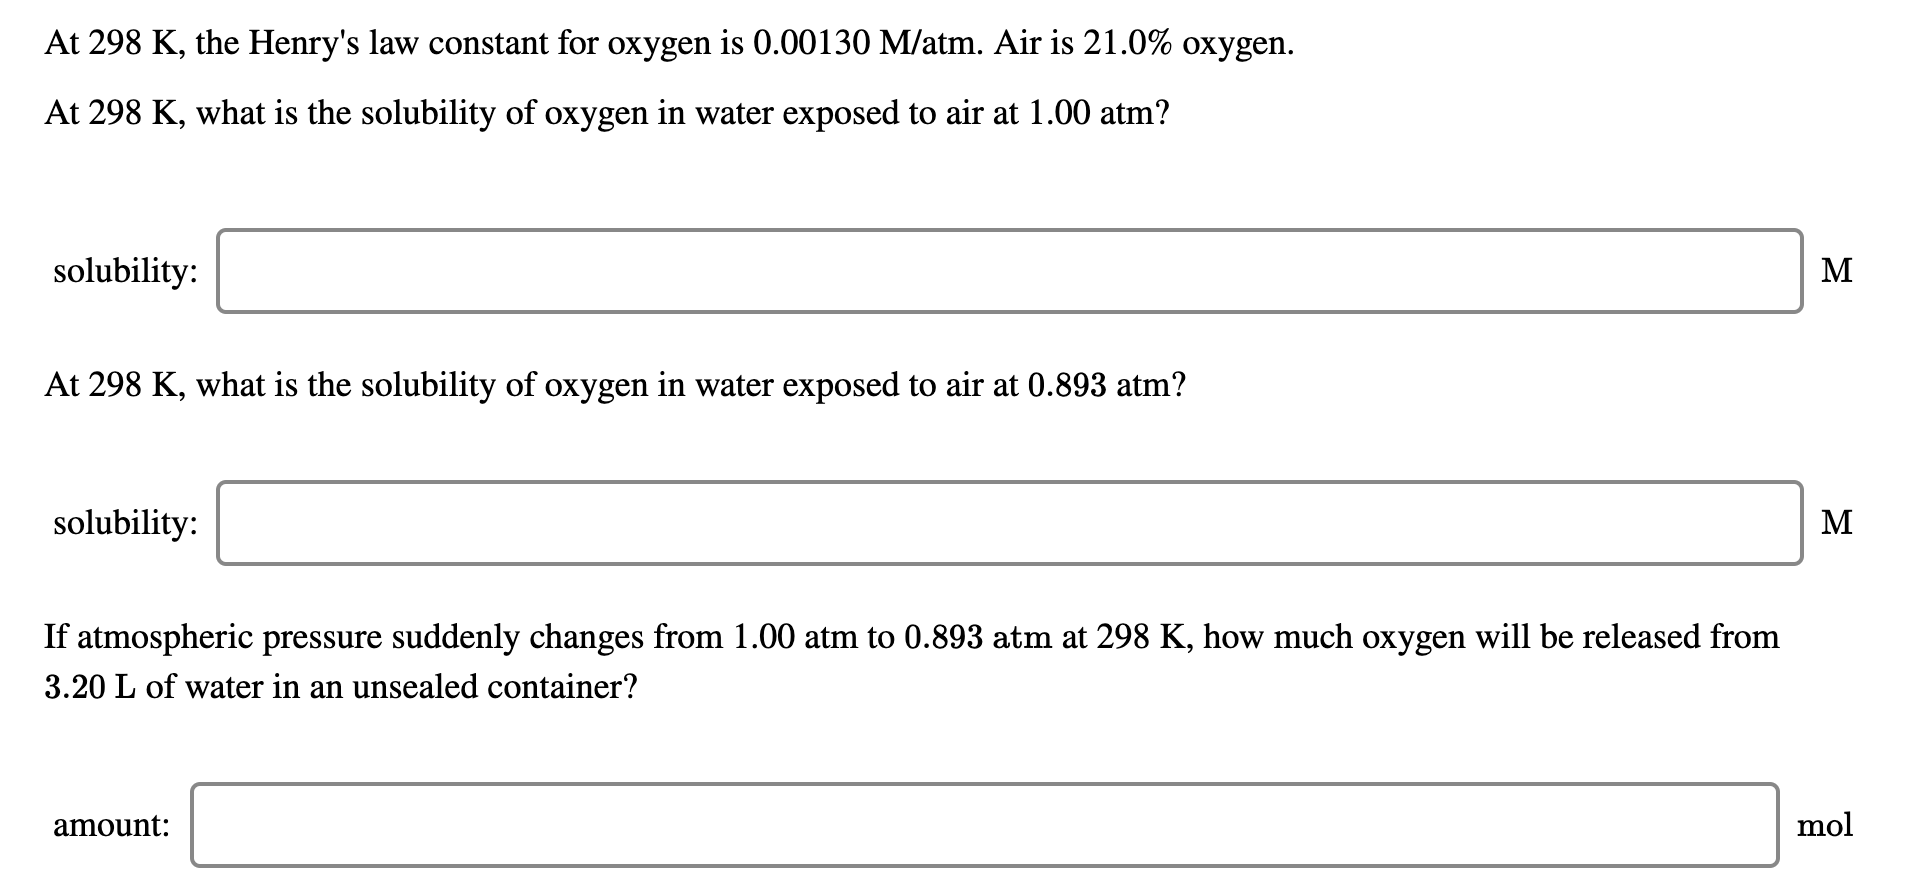 At 298 K, the Henry's law constant for oxygen is 0.00130 M/atm. Air is 21.0% oxygen.
At 298 K, what is the solubility of oxygen in water exposed to air at 1.00 atm?
solubility:
M
At 298 K, what is the solubility of oxygen in water exposed to air at 0.893 atm?
solubility:
M
If atmospheric pressure suddenly changes from 1.00 atm to 0.893 atm at 298 K, how much oxygen will be released from
3.20 L of water in an unsealed container?
amount:
mol
